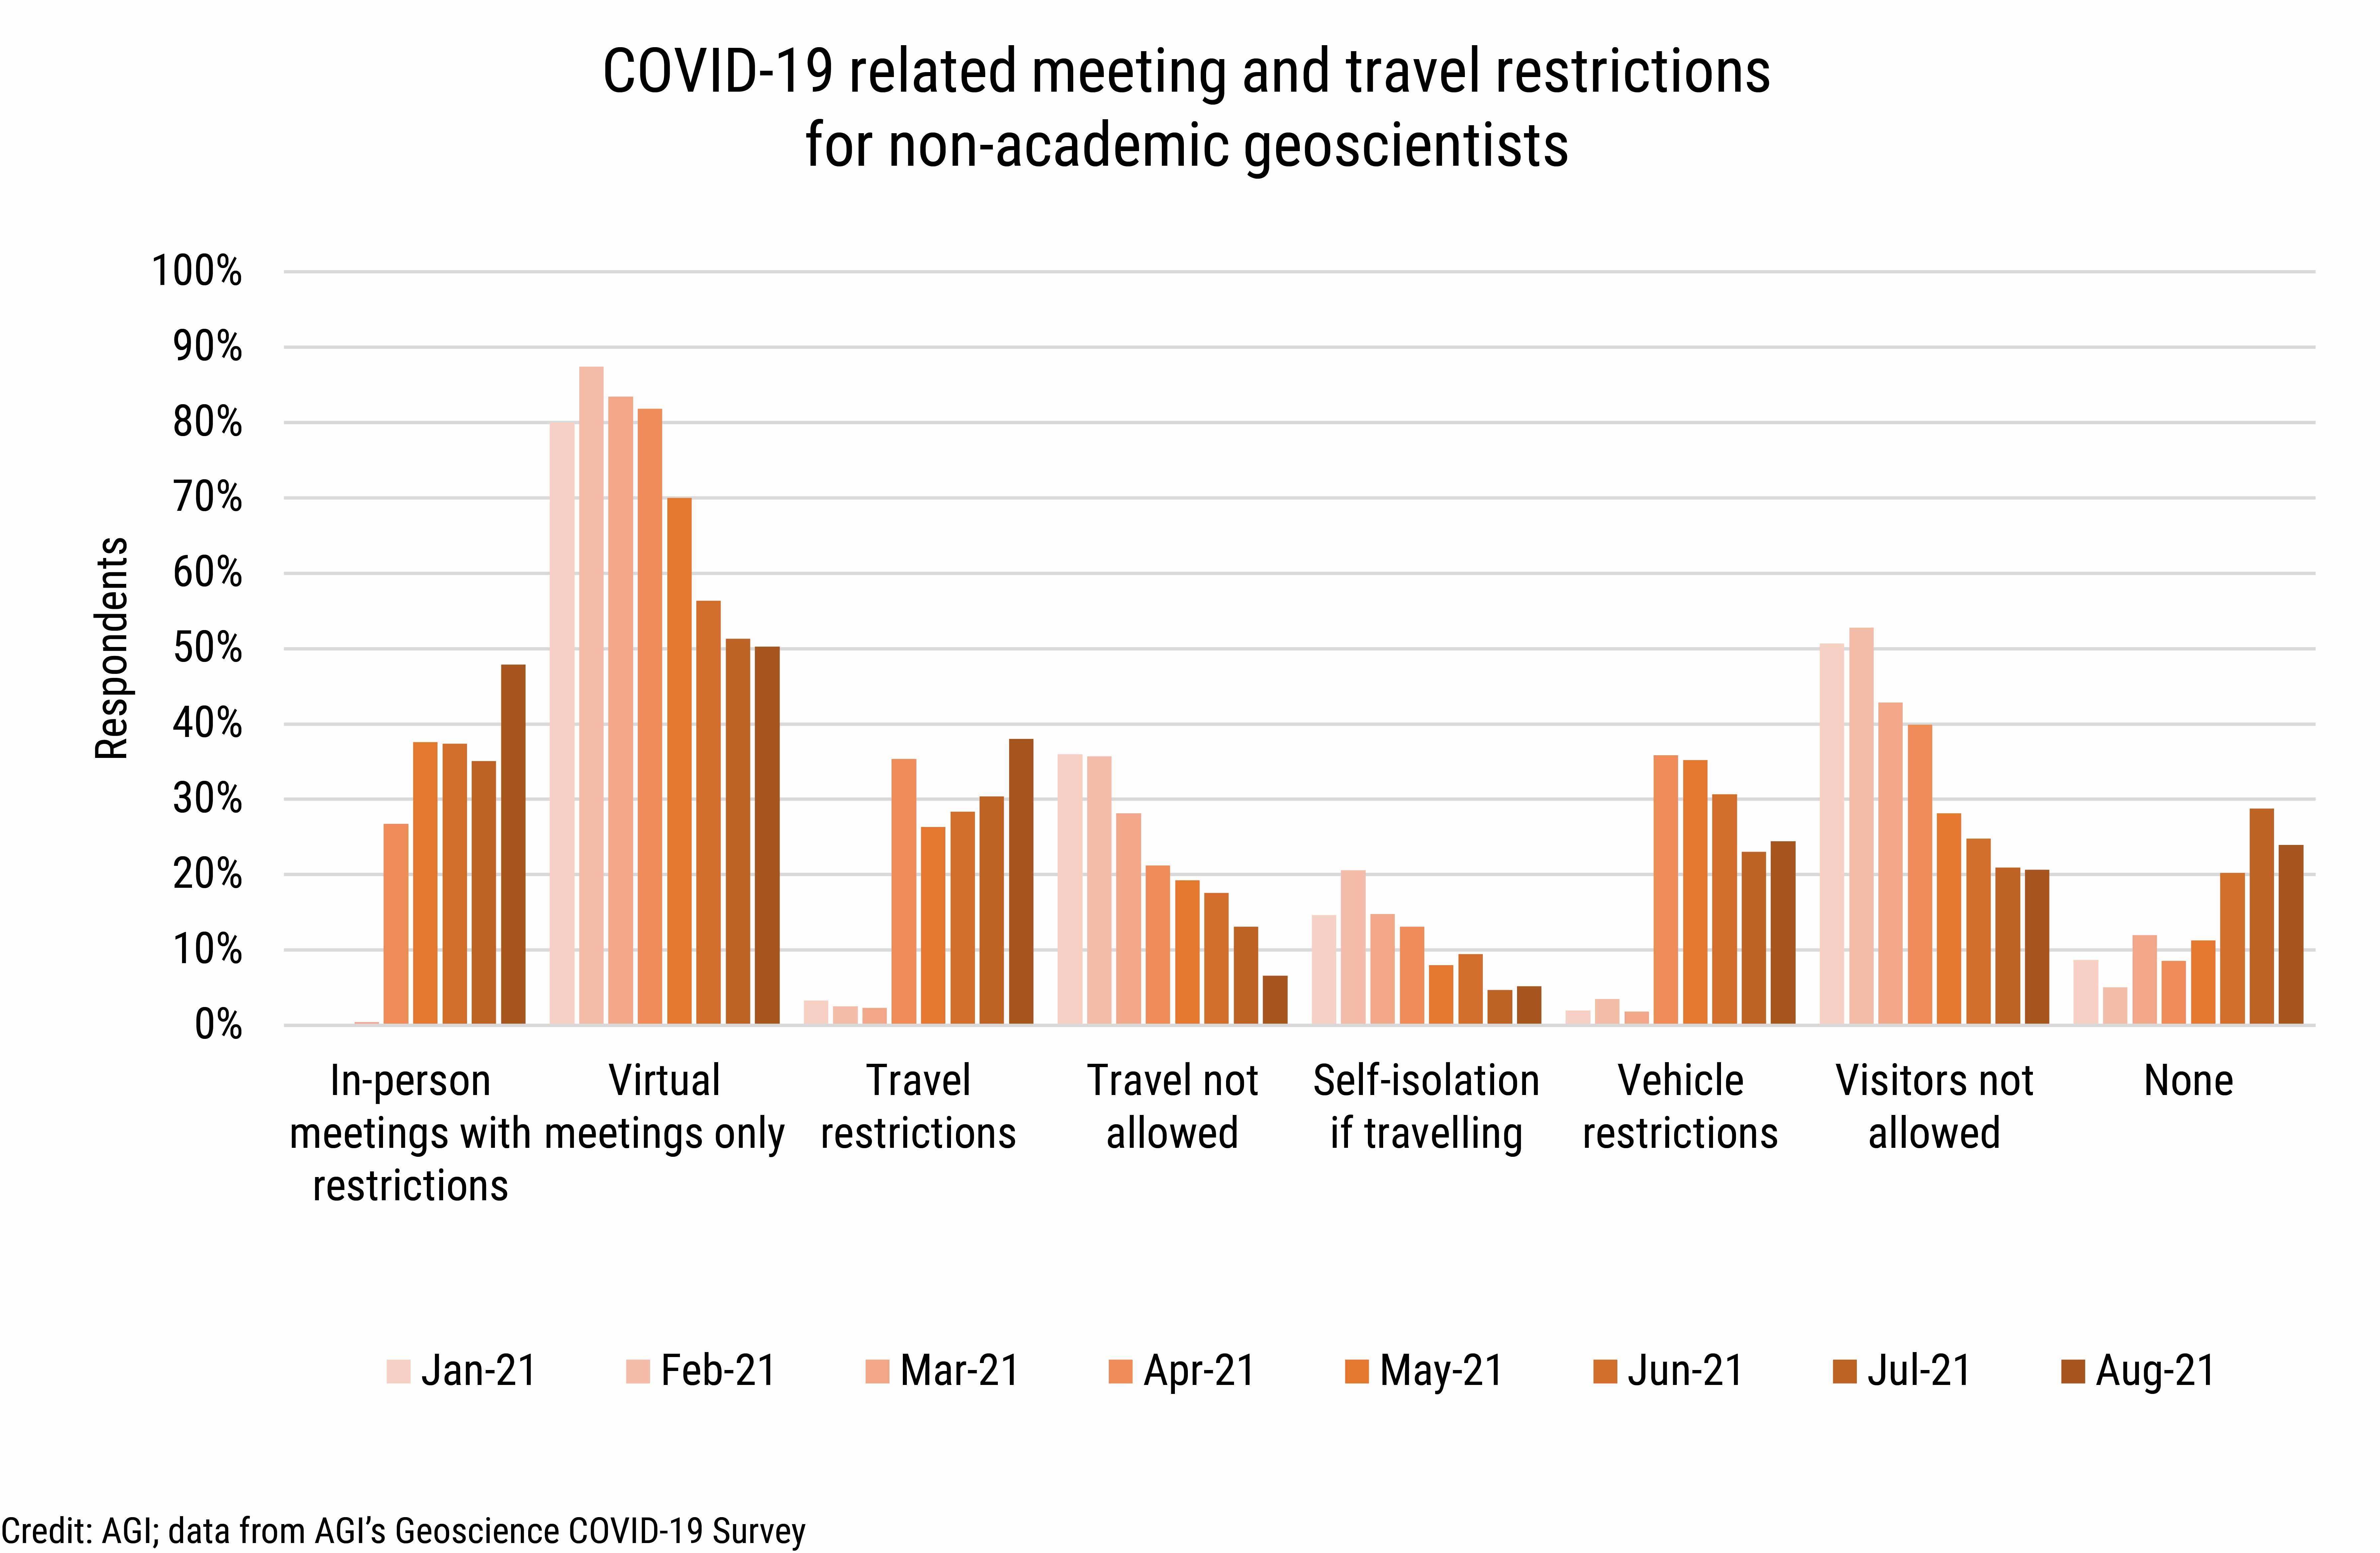 DB_2021-031 chart 06: COVID-19 related meeting and travel restrictions for non-academic gesocientists (Credit: AGI; data from AGI's Geoscience COVID-19 Survey)